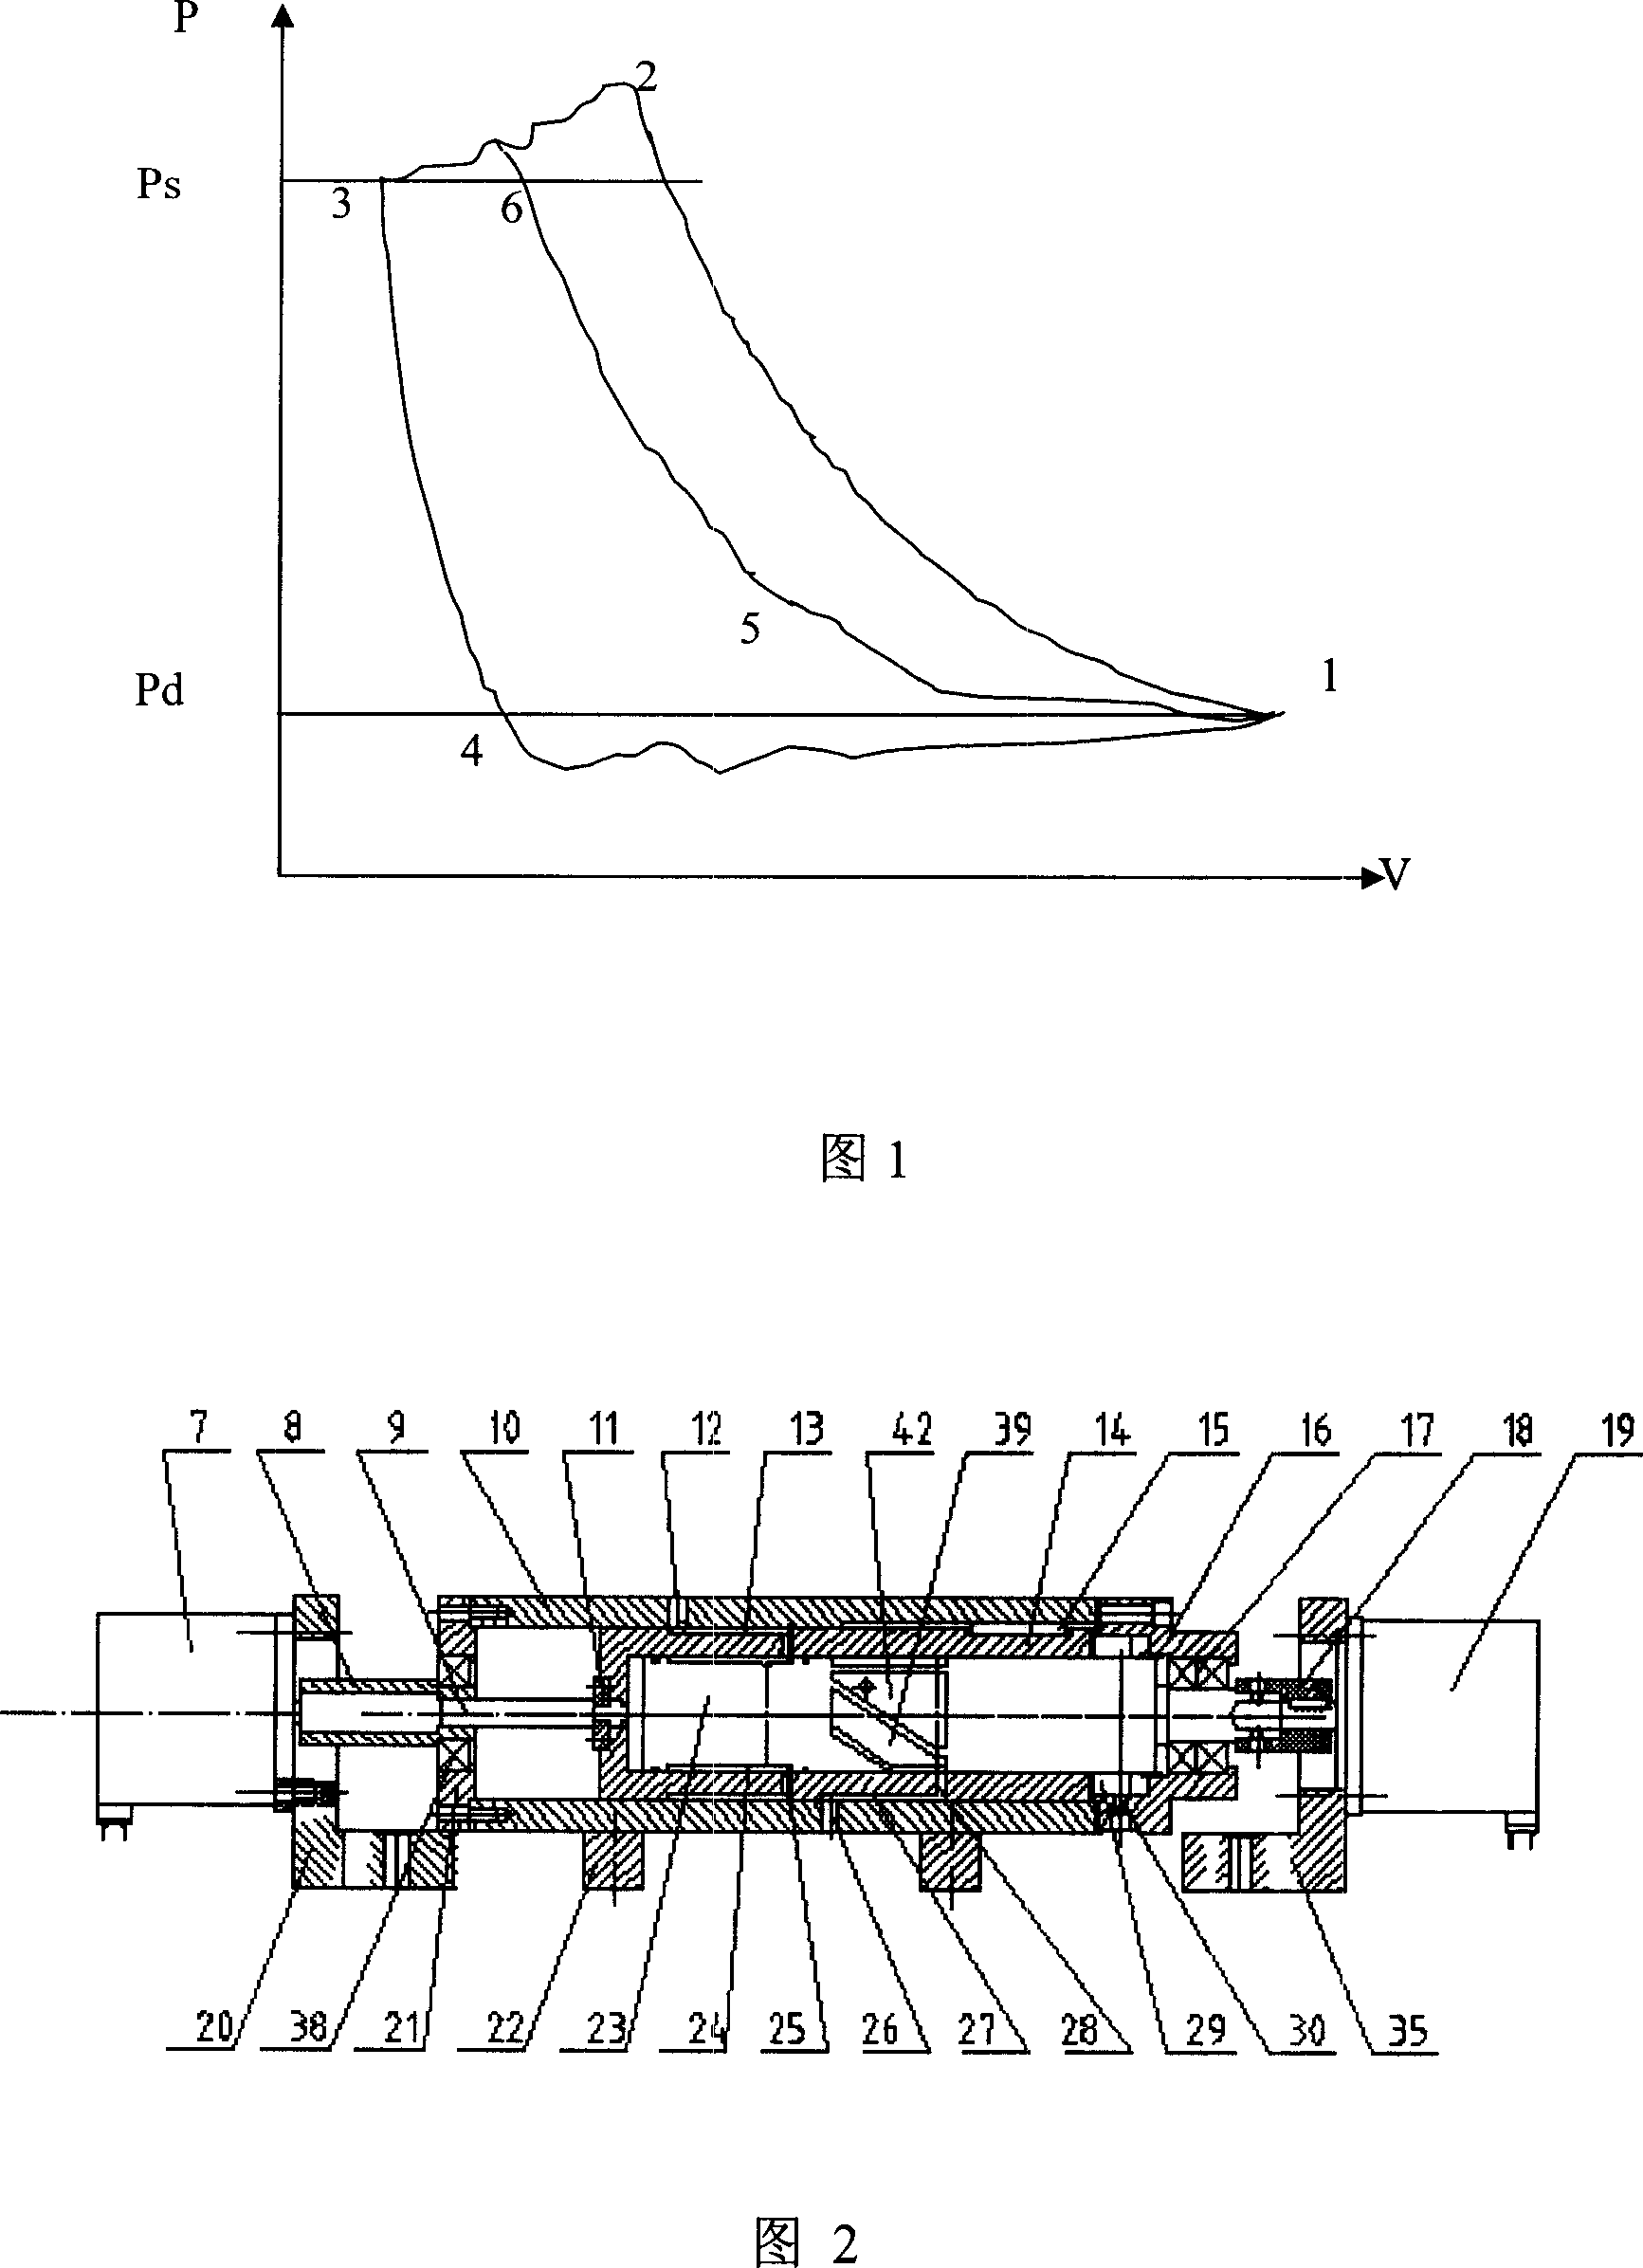 Device for lifting piston compressor air inlet valve based on time control